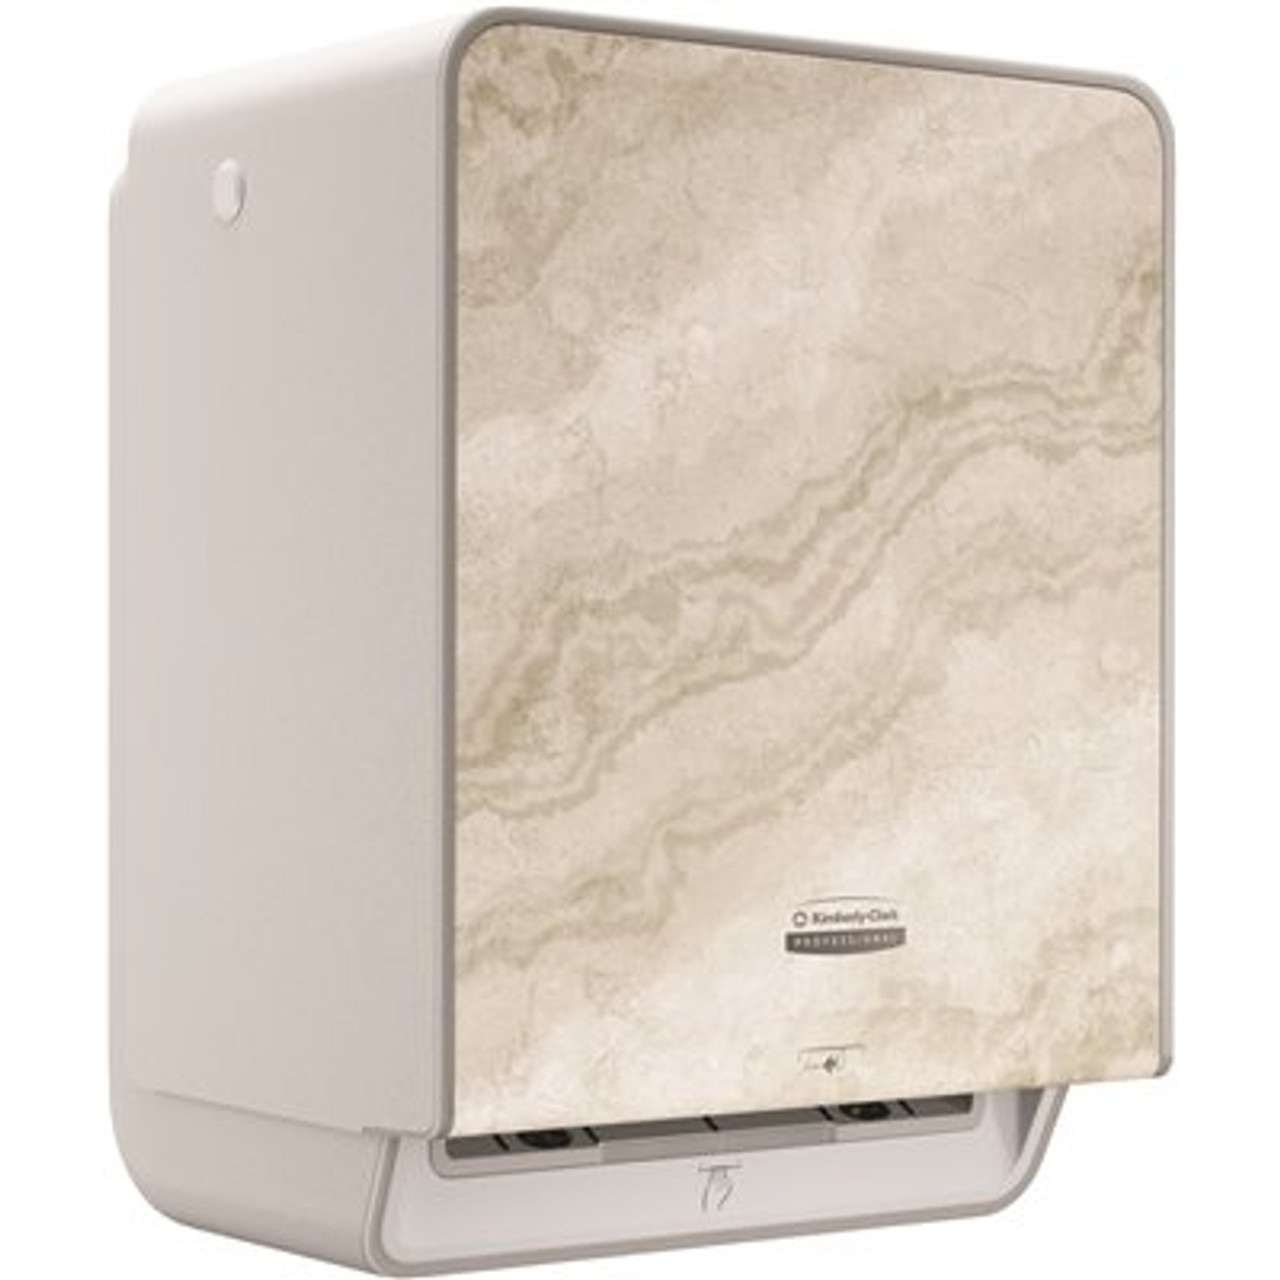 Automatic Roll Towel Dispenser (58740), Warm Marble Design Faceplate; 1 Dispenser and Faceplate / Case